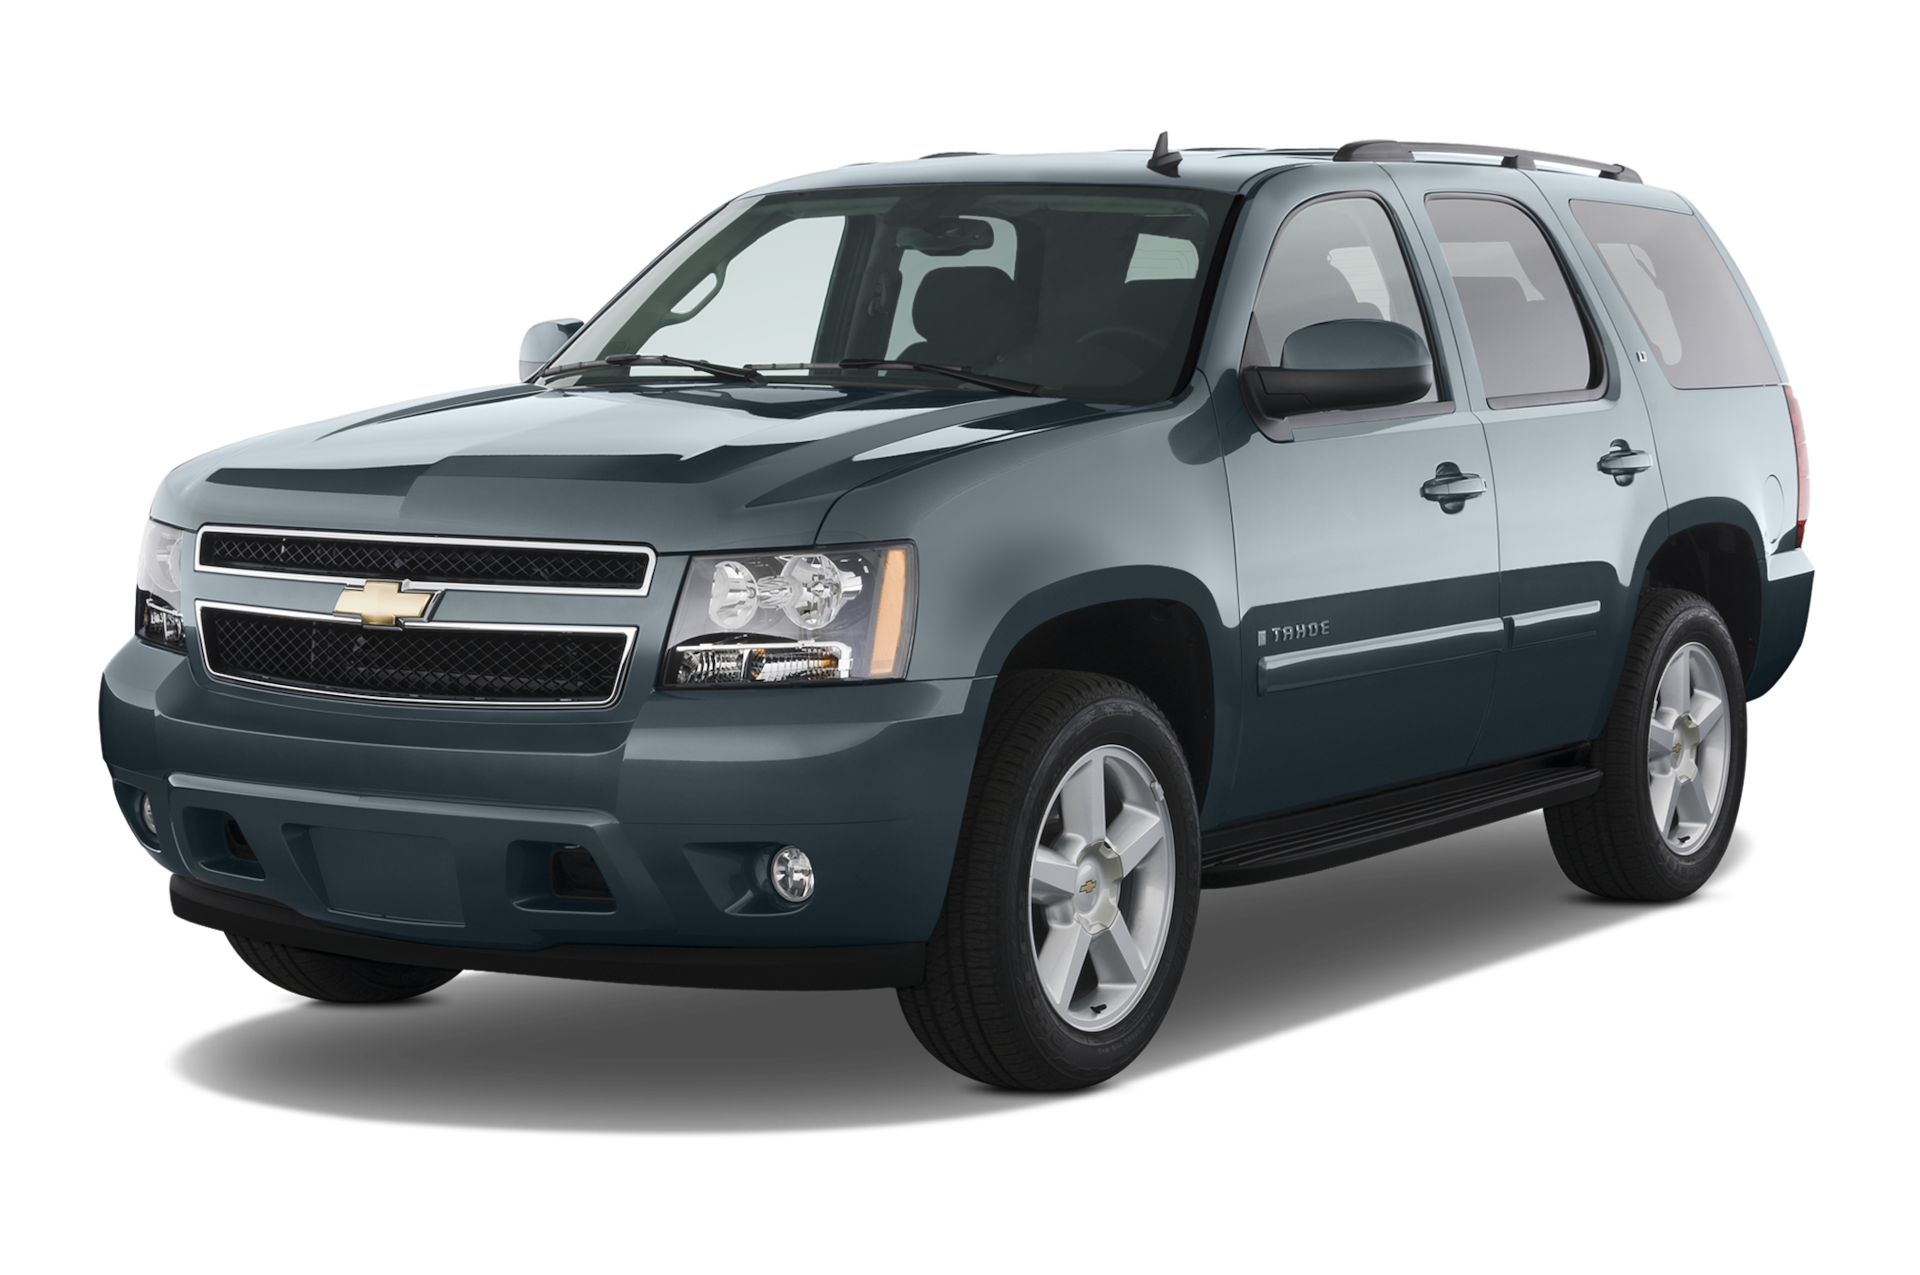 2014 Chevrolet Tahoe Prices, Reviews, and Photos - MotorTrend